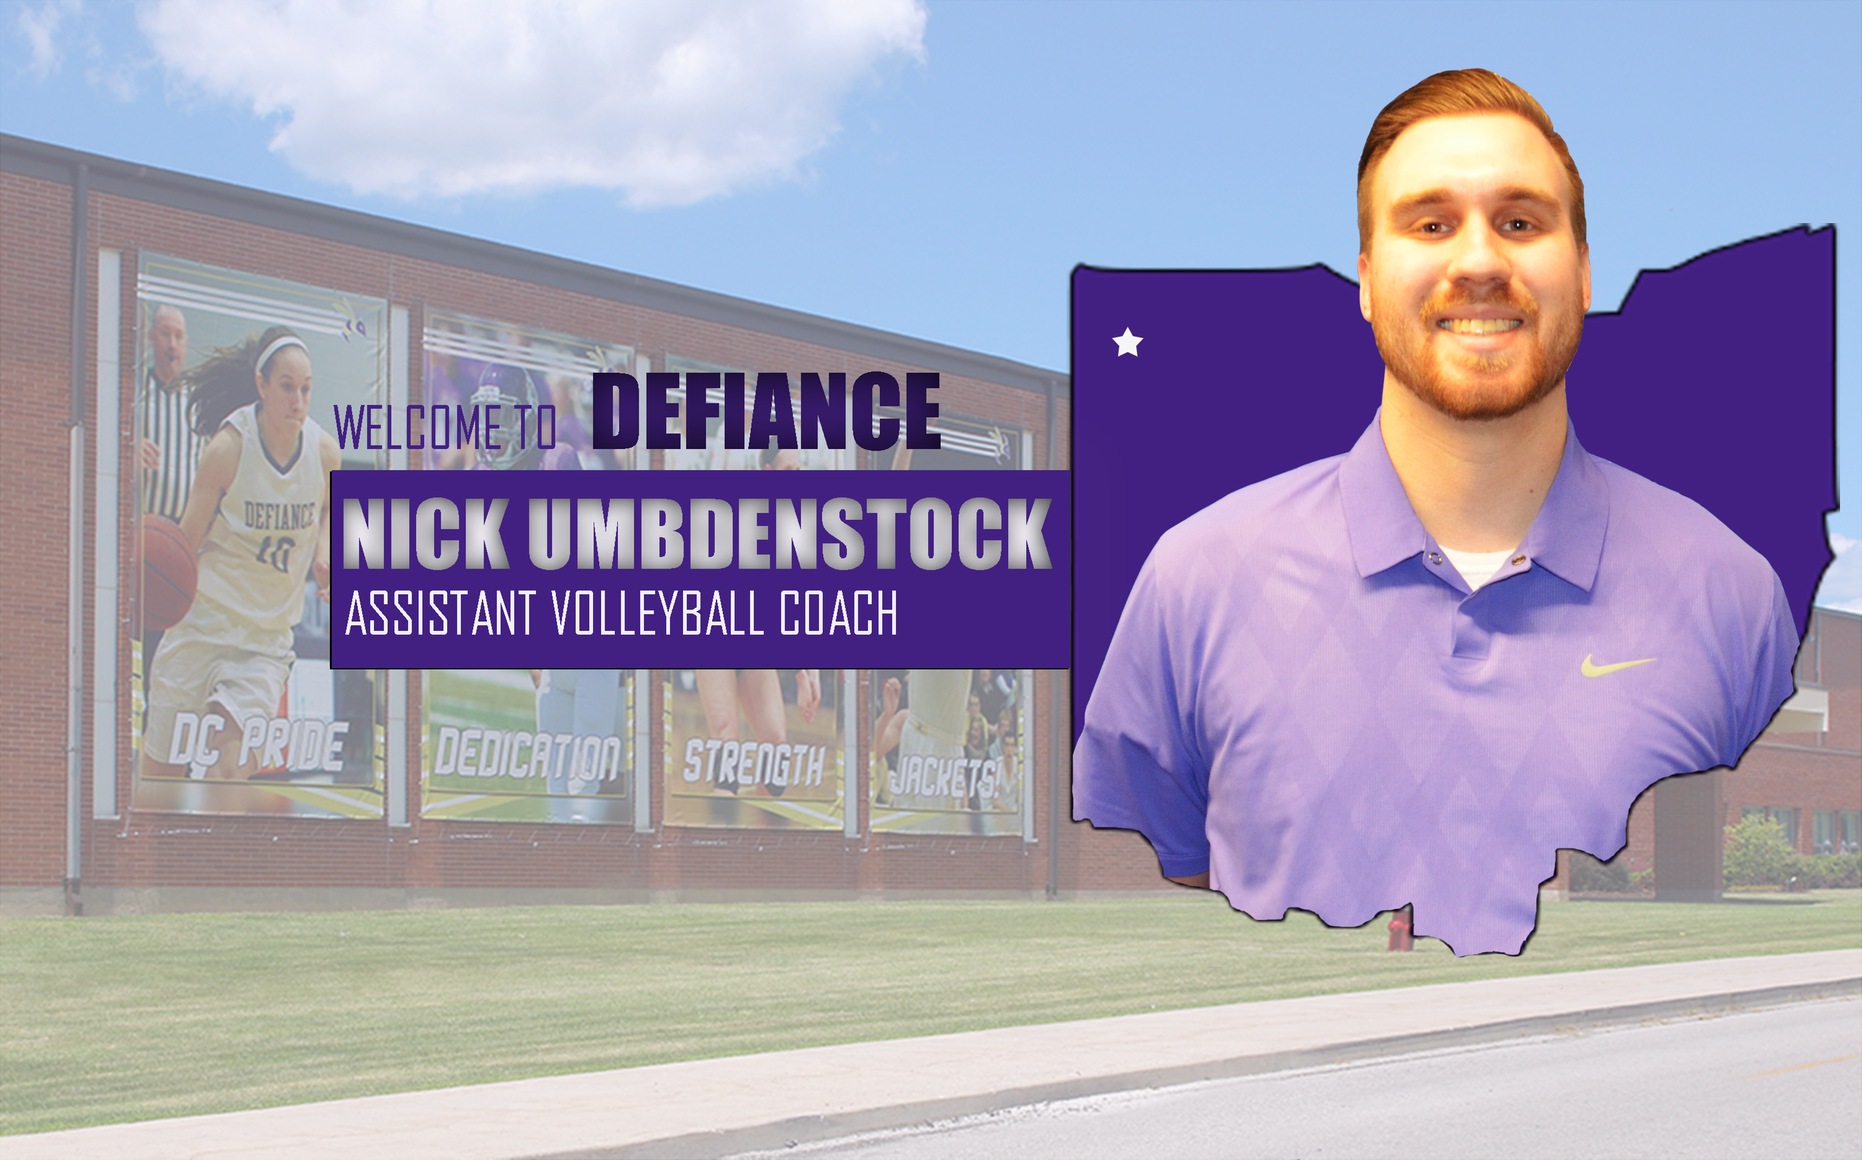 Umbdenstock joins volleyball as assistant coach